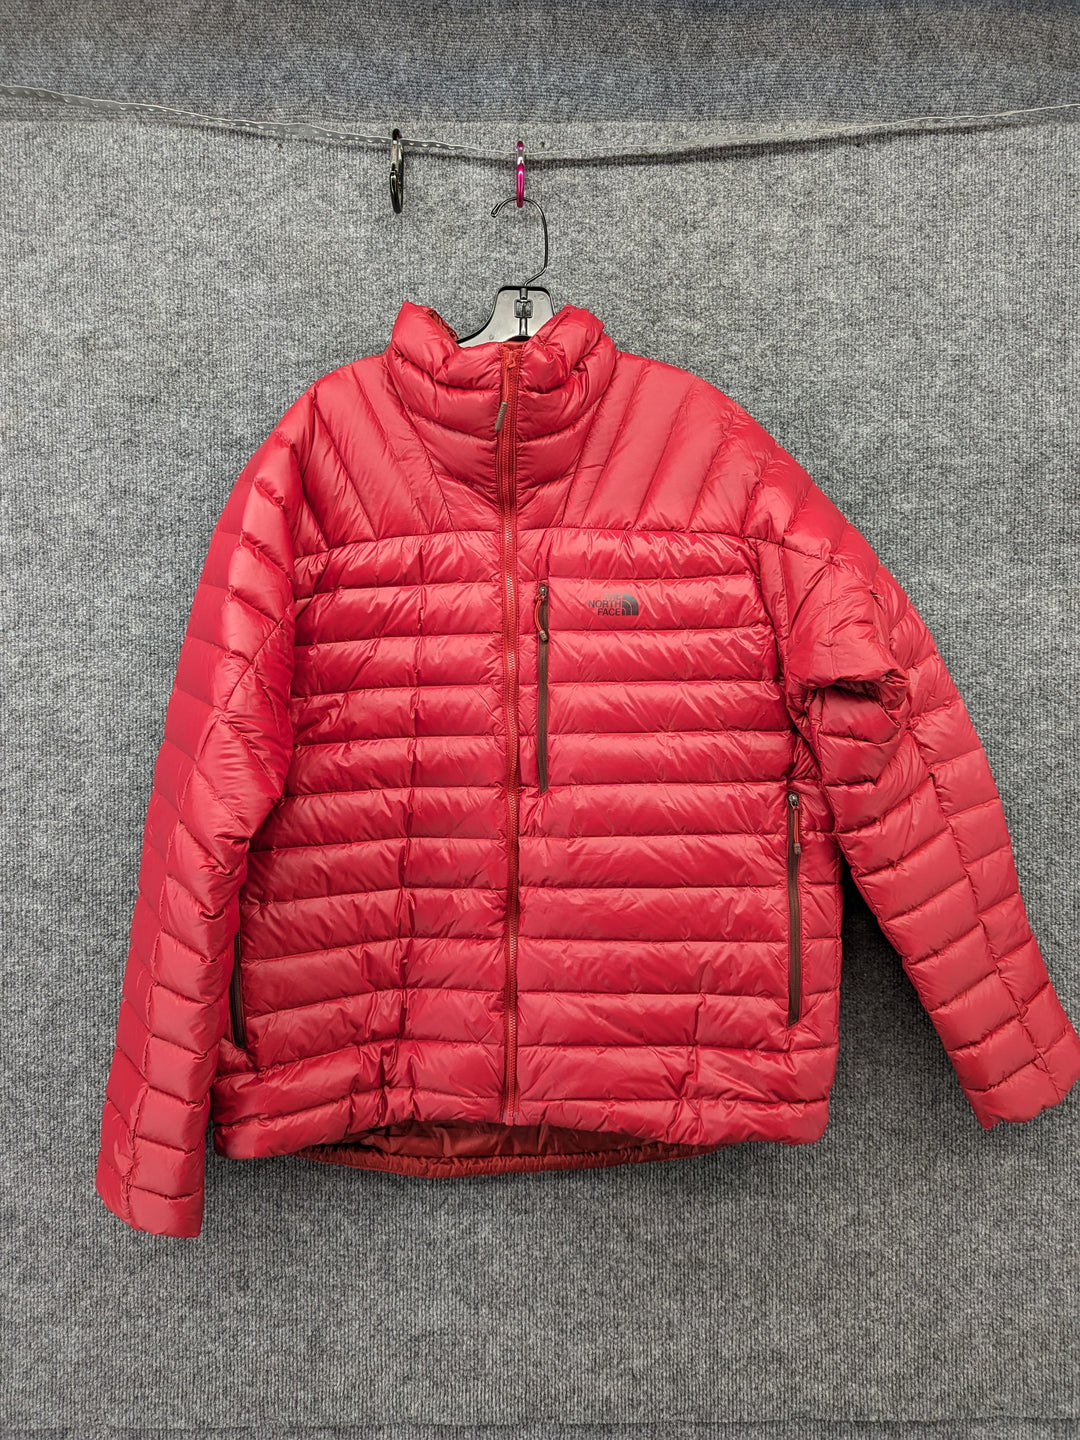 The North Face Down Jacket Men's Down Jacket Women's 